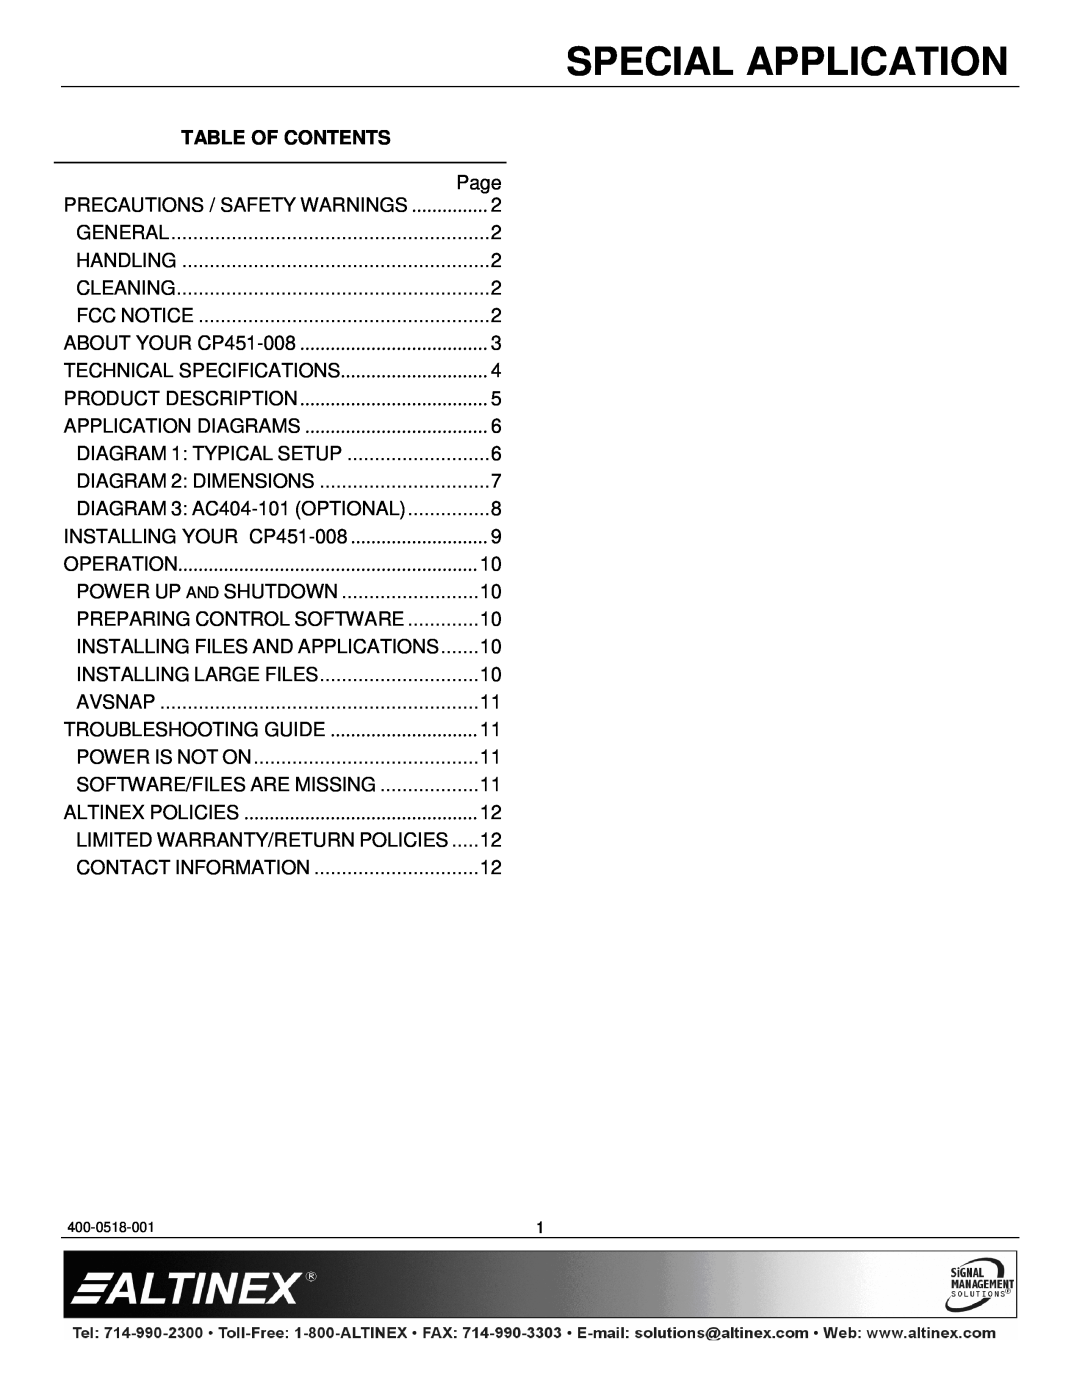 Altinex CP451-008 manual Table Of Contents, Special Application, Page 